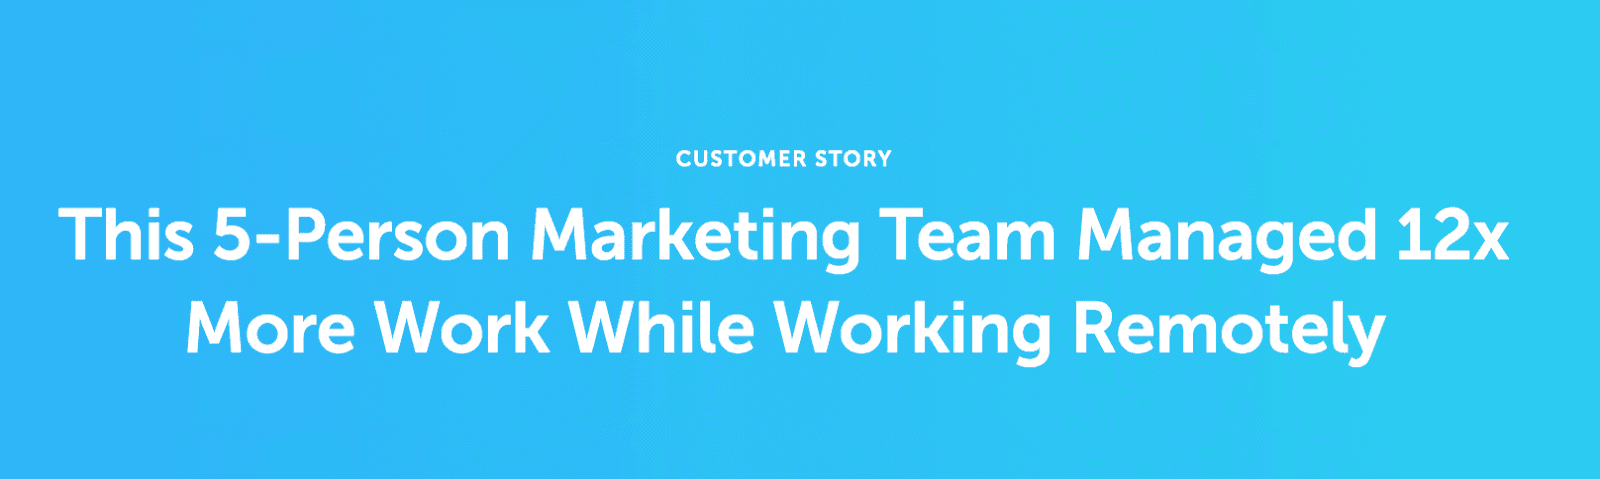 Customer story of a 5 person marketing doing 12x the work while working remote